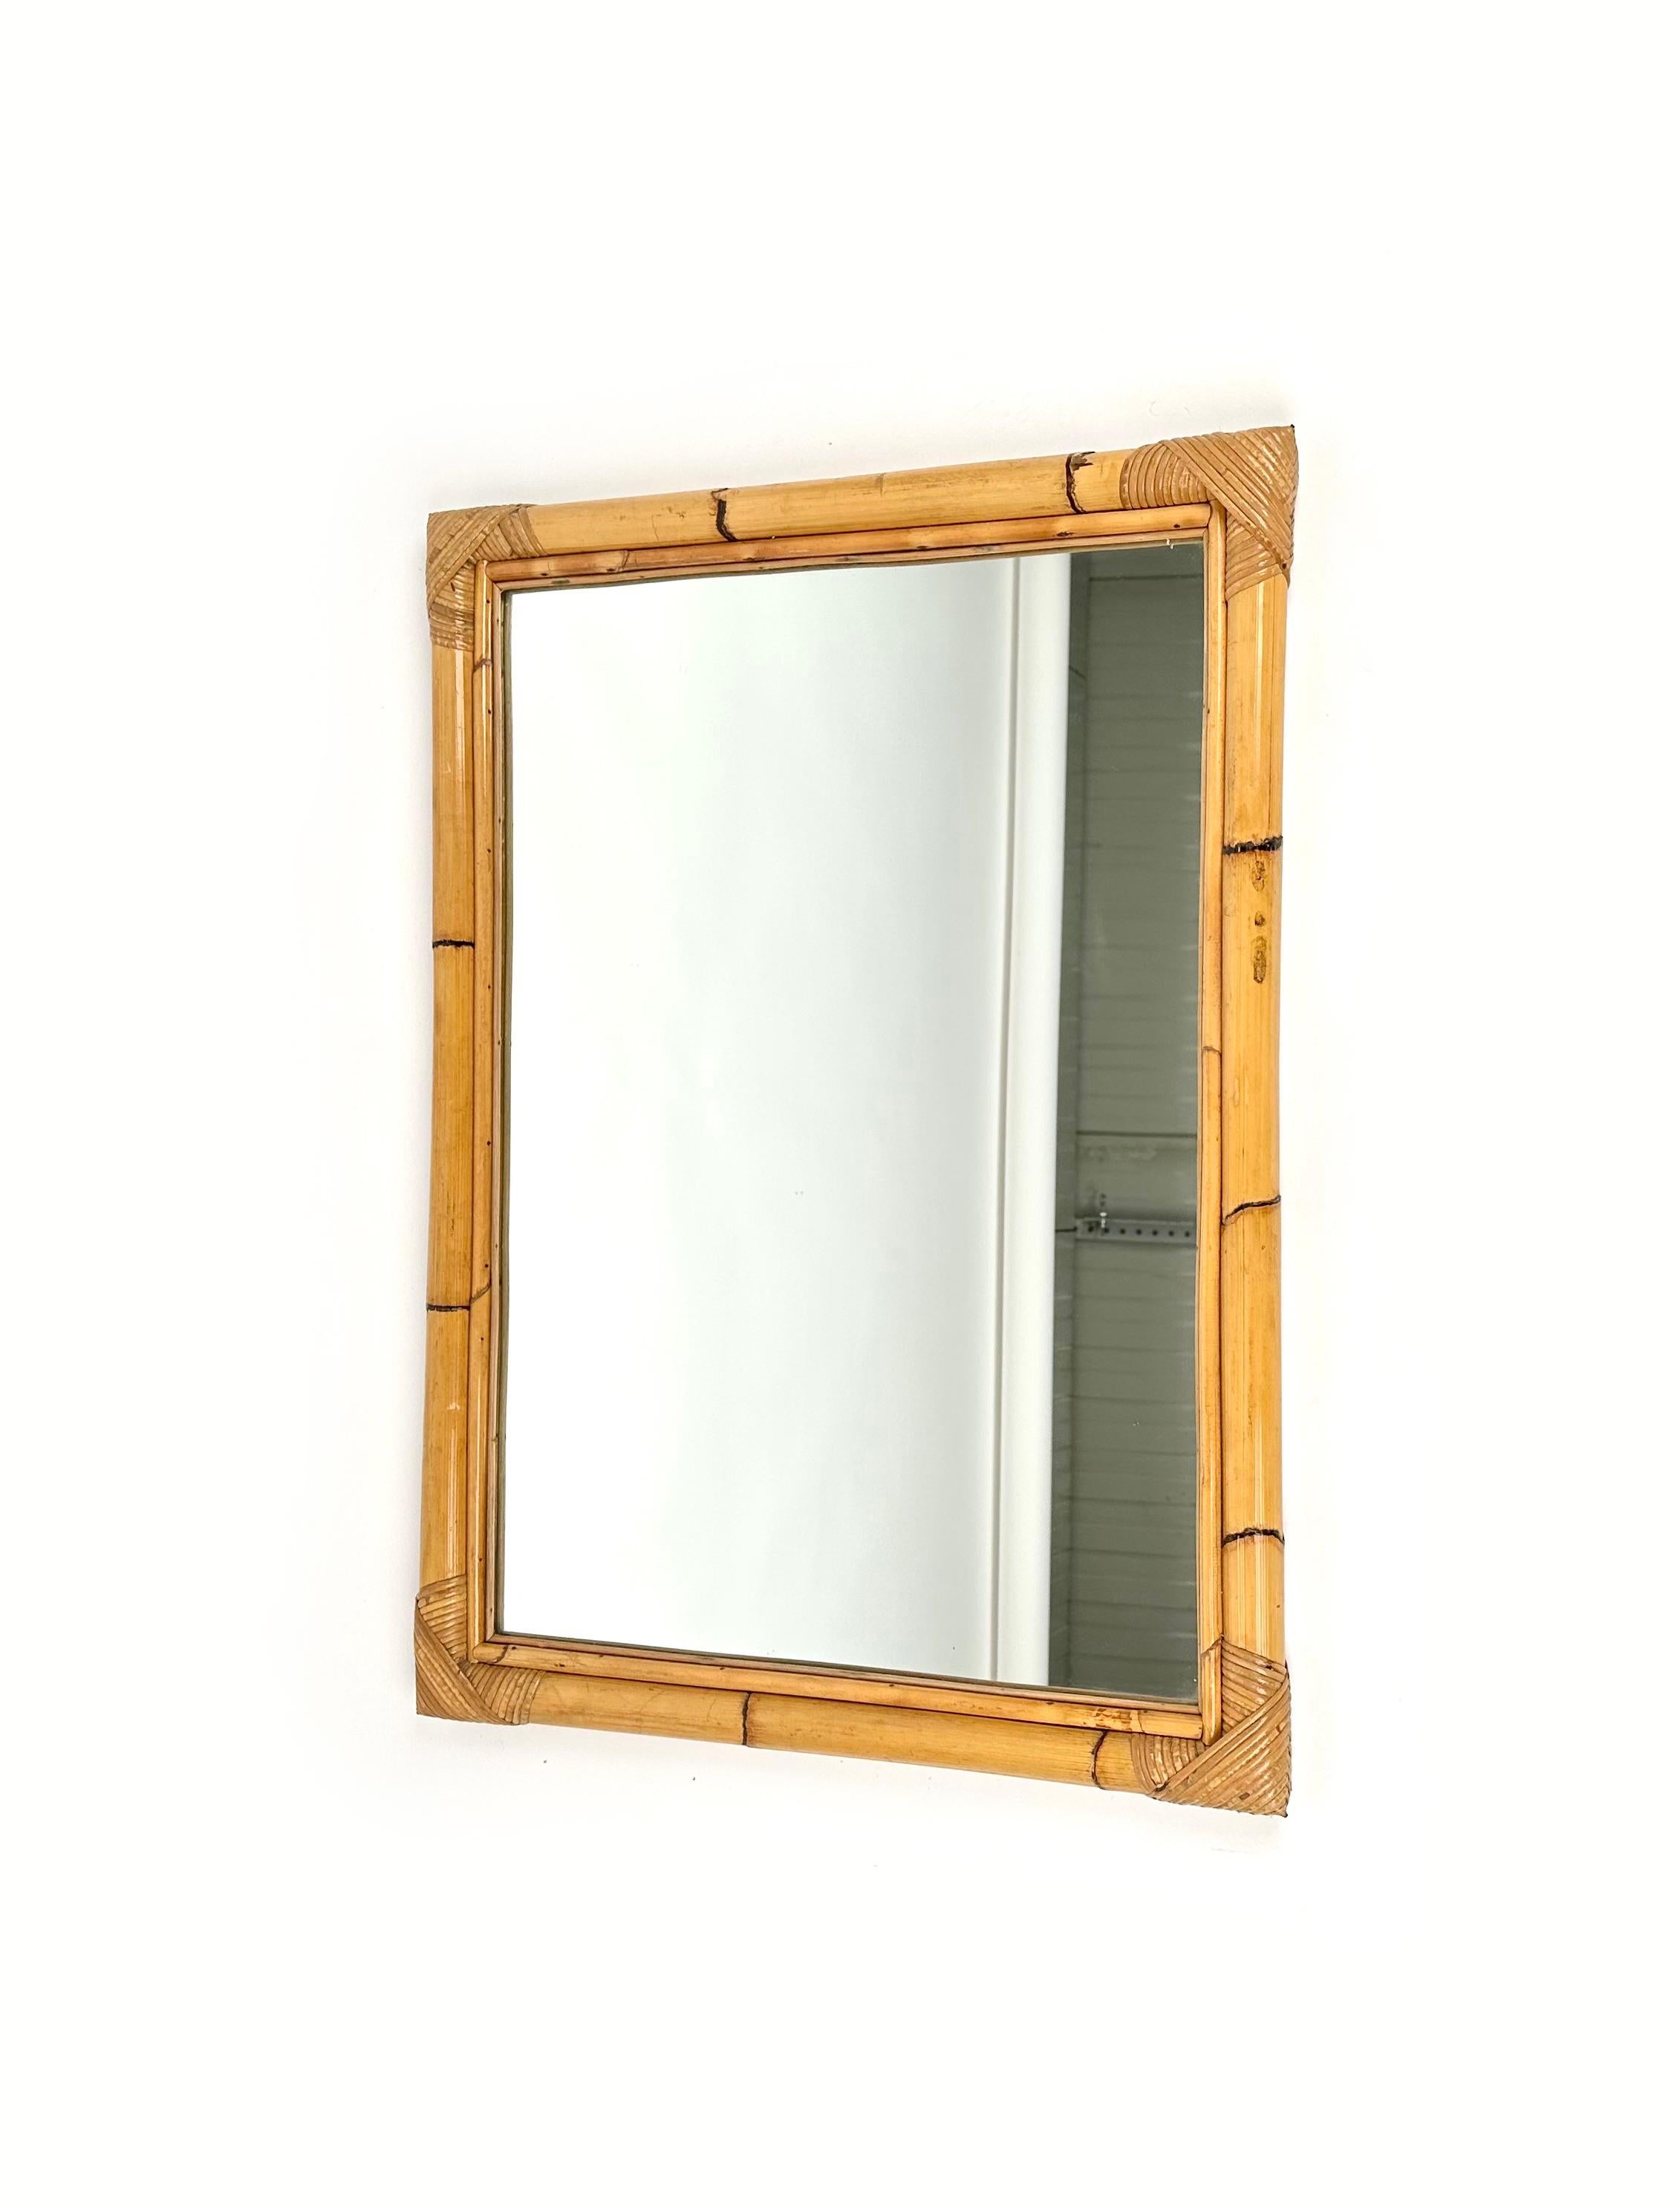 Late 20th Century Mid-Century Rectangular Wall Mirror in Bamboo and Rattan, Italy, 1970s For Sale